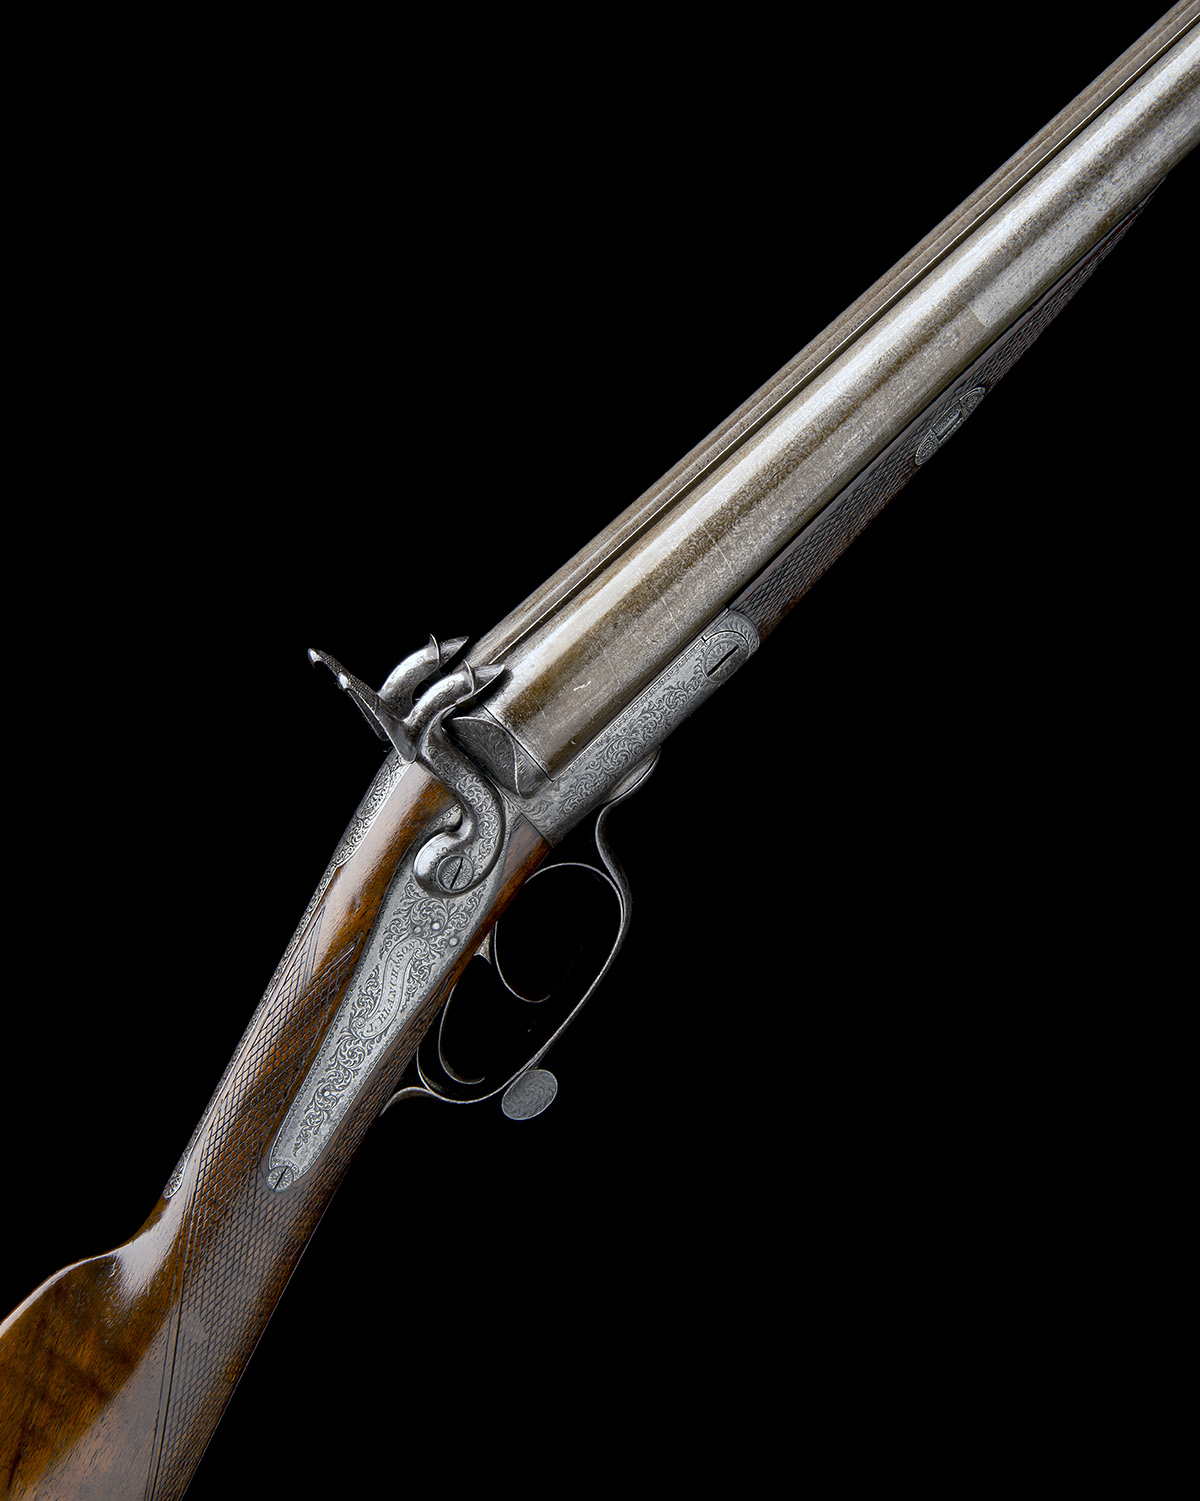 J. BLANCH & SON A 12-BORE ROTARY-UNDERLEVER PINFIRE HAMMERGUN, serial no. 4326, 30in. damascus